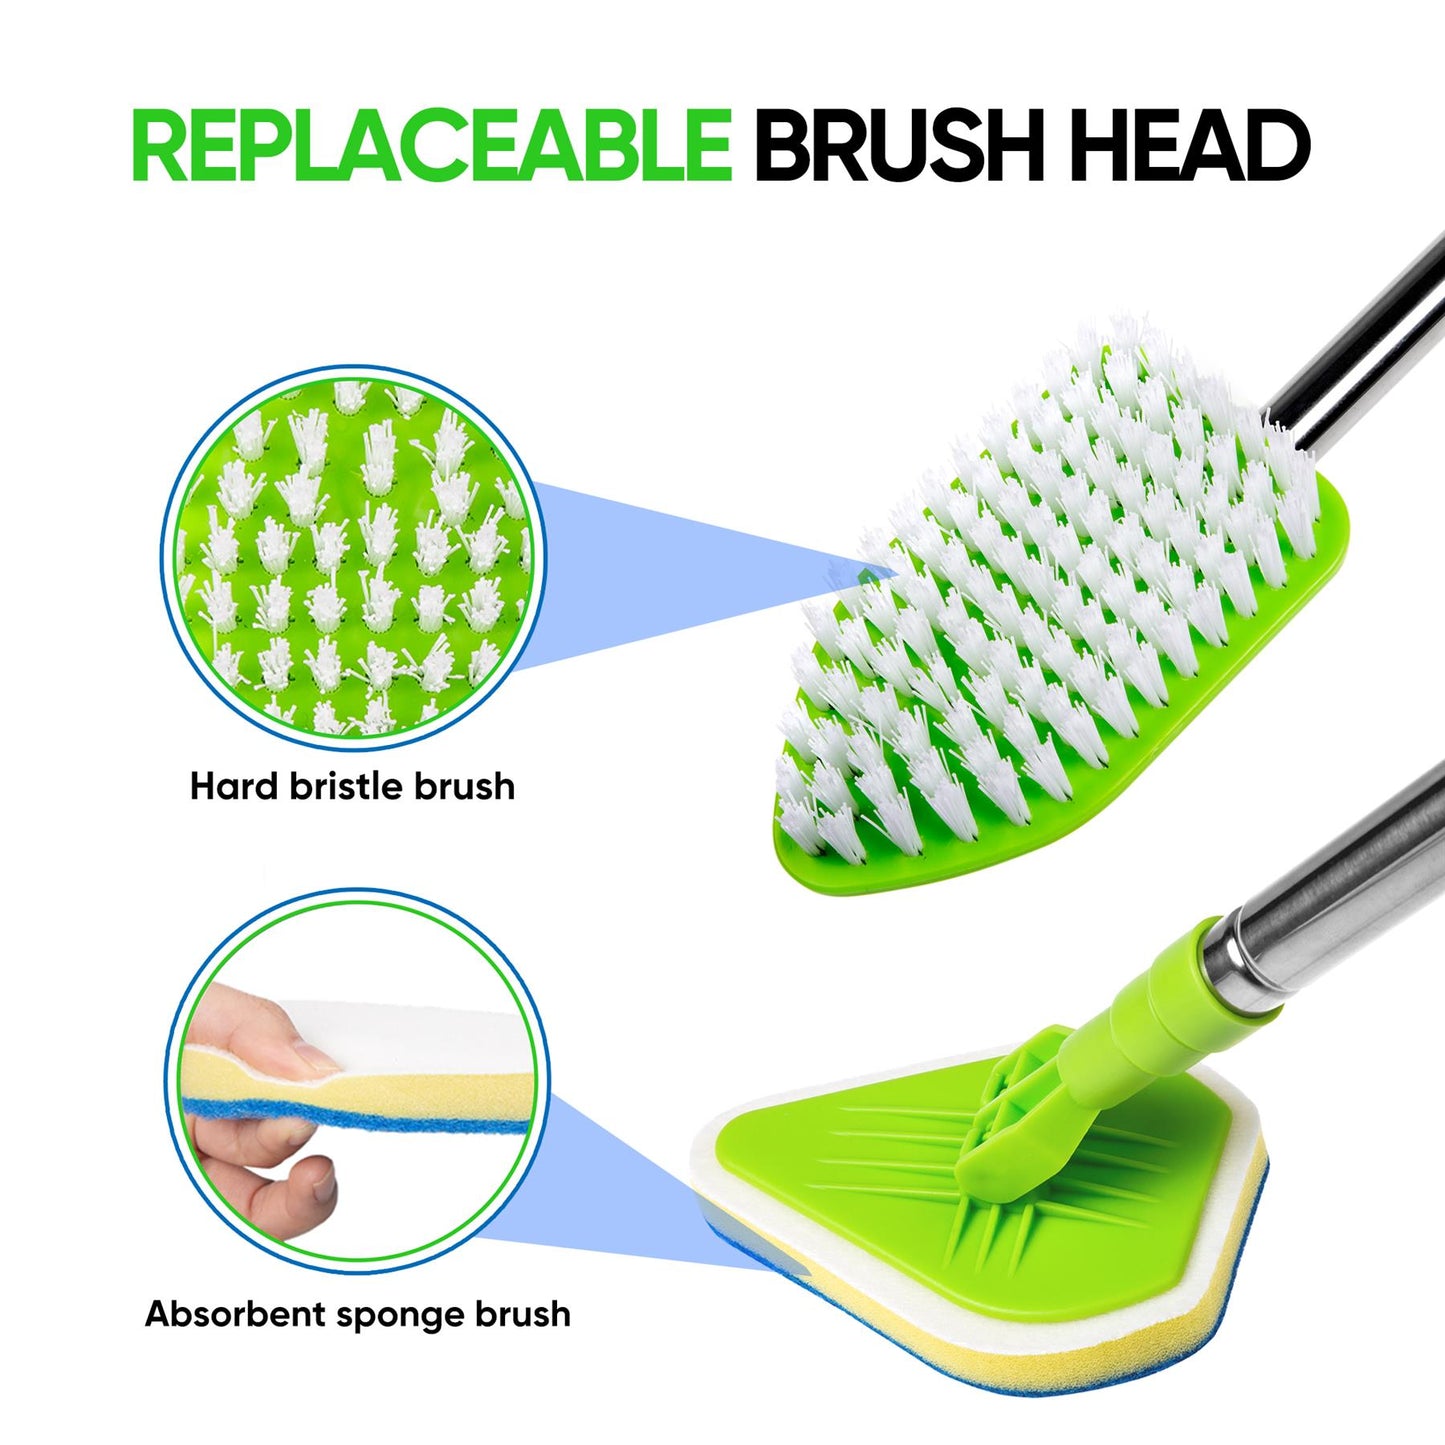 Extendable Bathroom Cleaning Mop